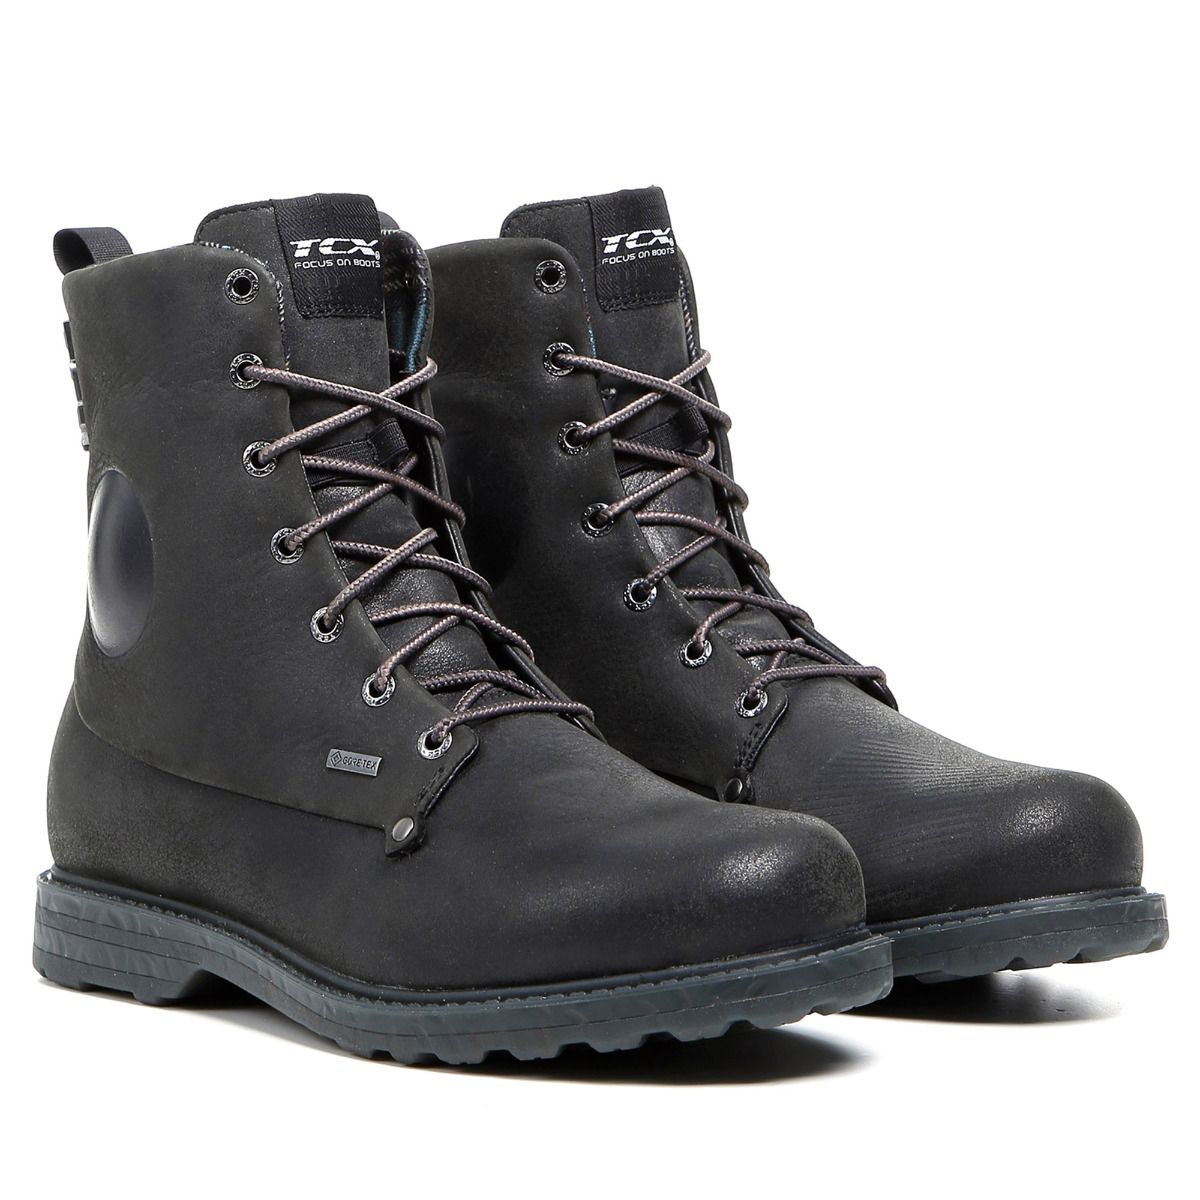 Image of TCX Boot Blend 2 Gore-Tex Black Size 42 ID 8000958234368